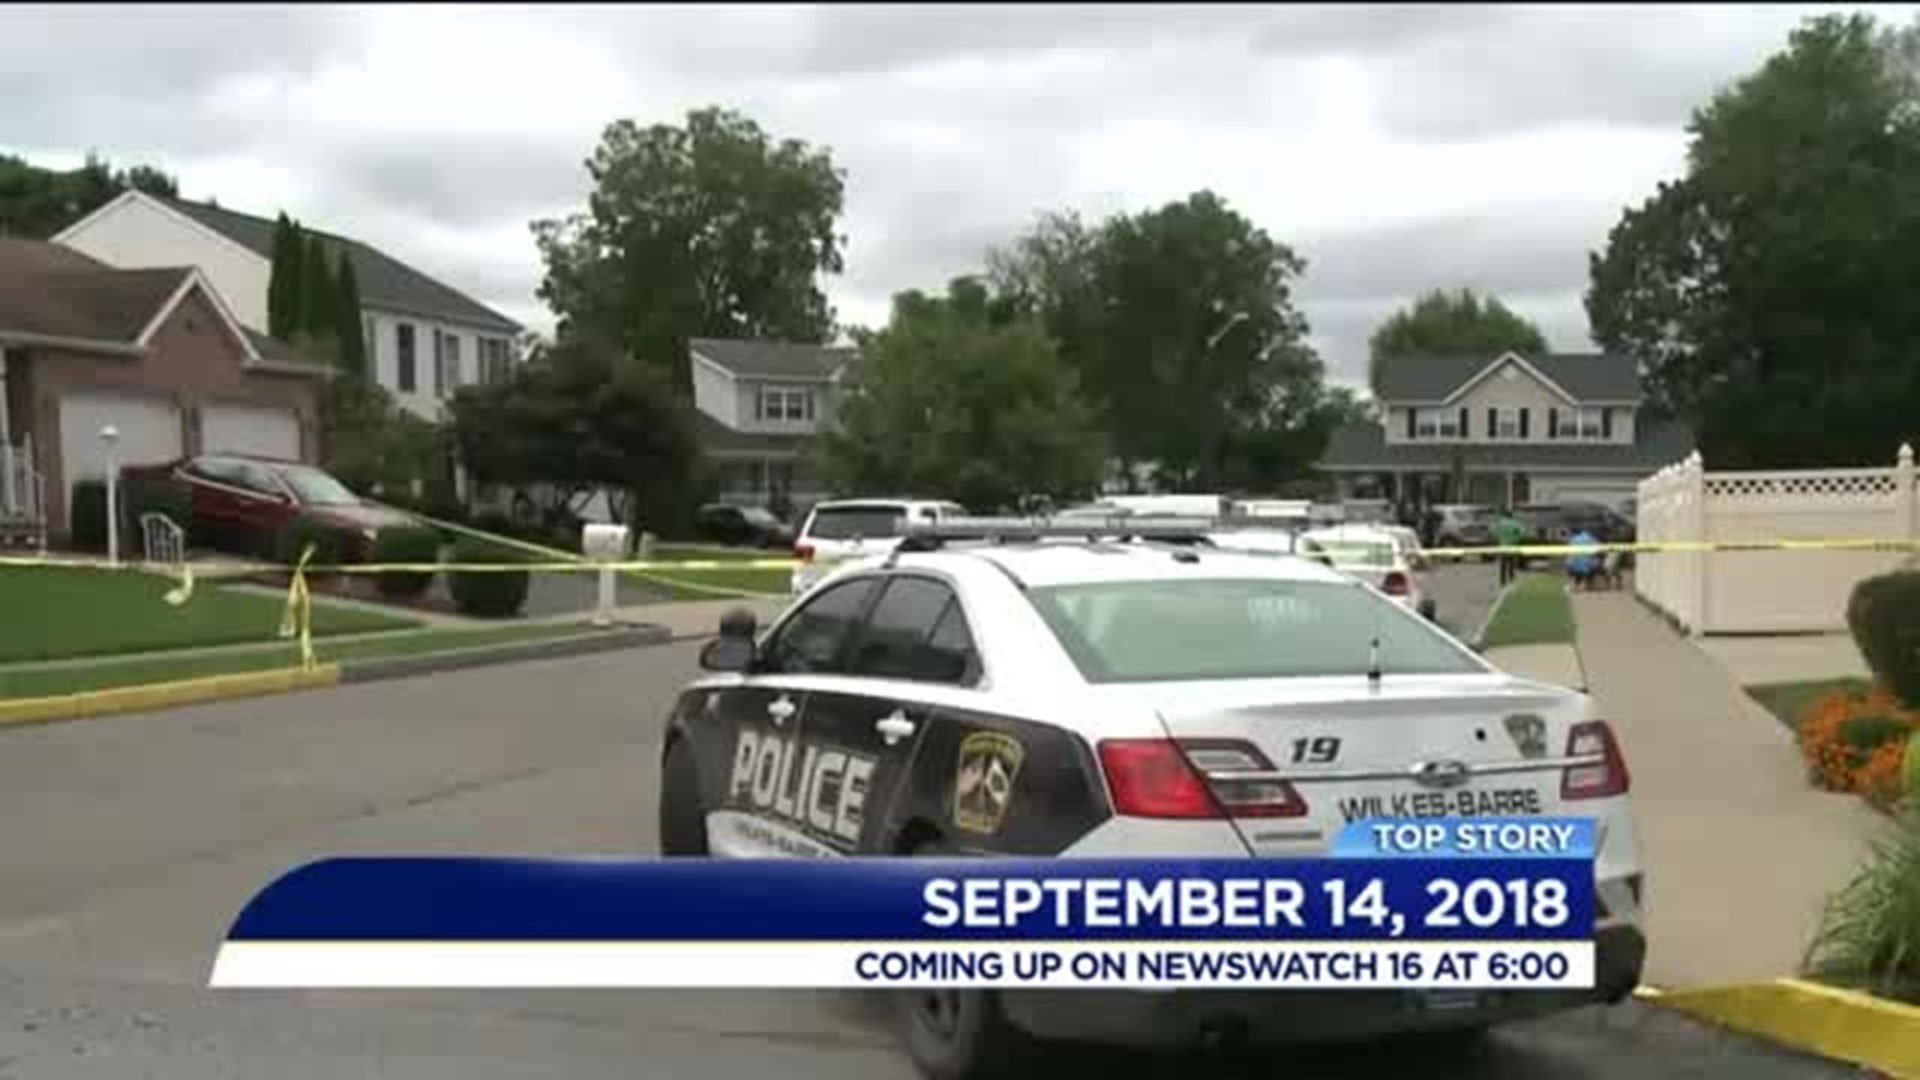 Death Investigation in Wilkes-Barre